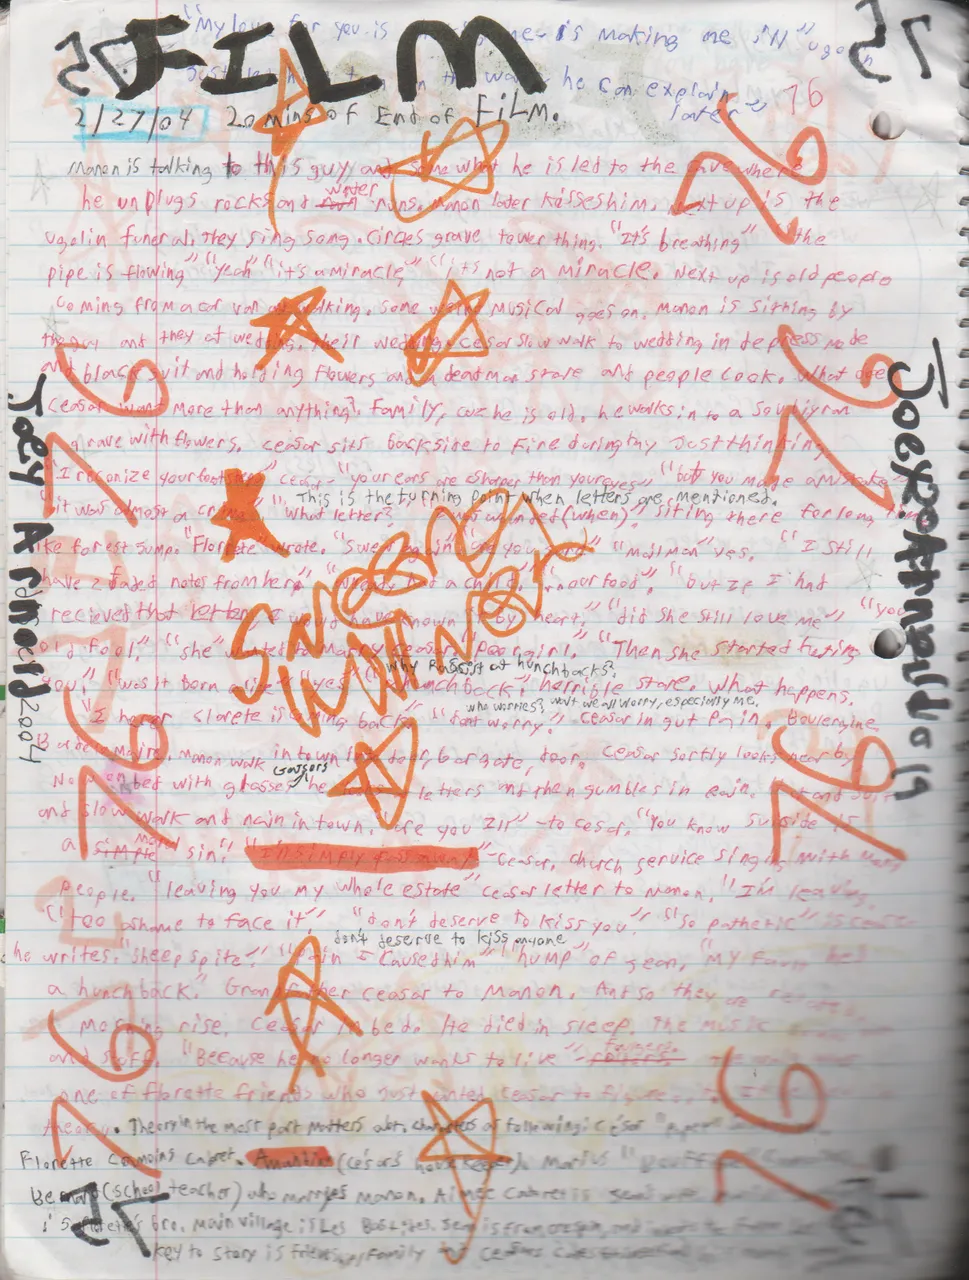 2004-01-29 - Thursday - Carpetball FGHS Senior Project Journal, Joey Arnold, Part 02, 96pages numbered, Notebook-74.png